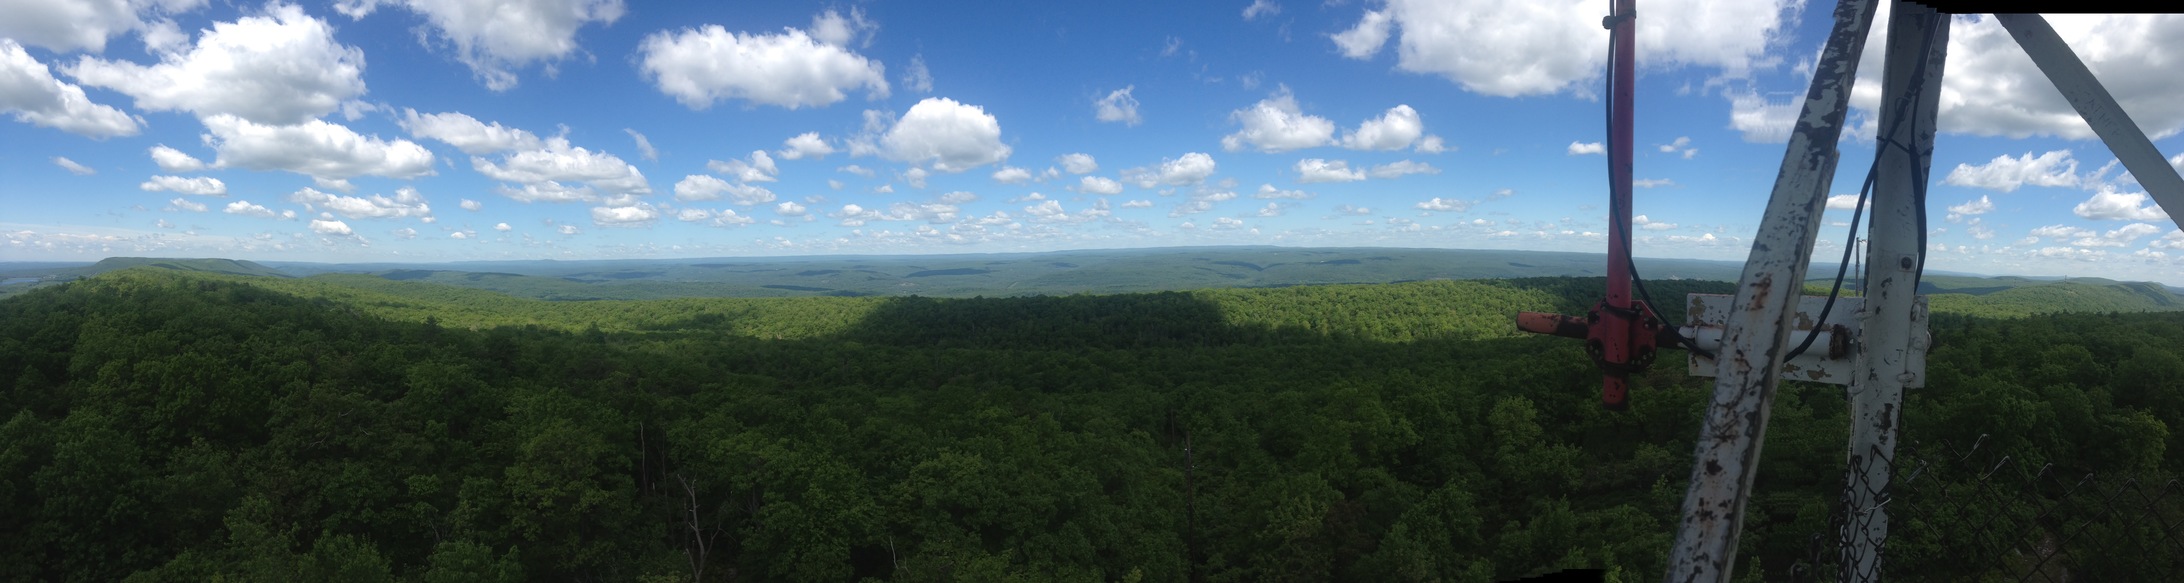 Catfish Fire Tower view